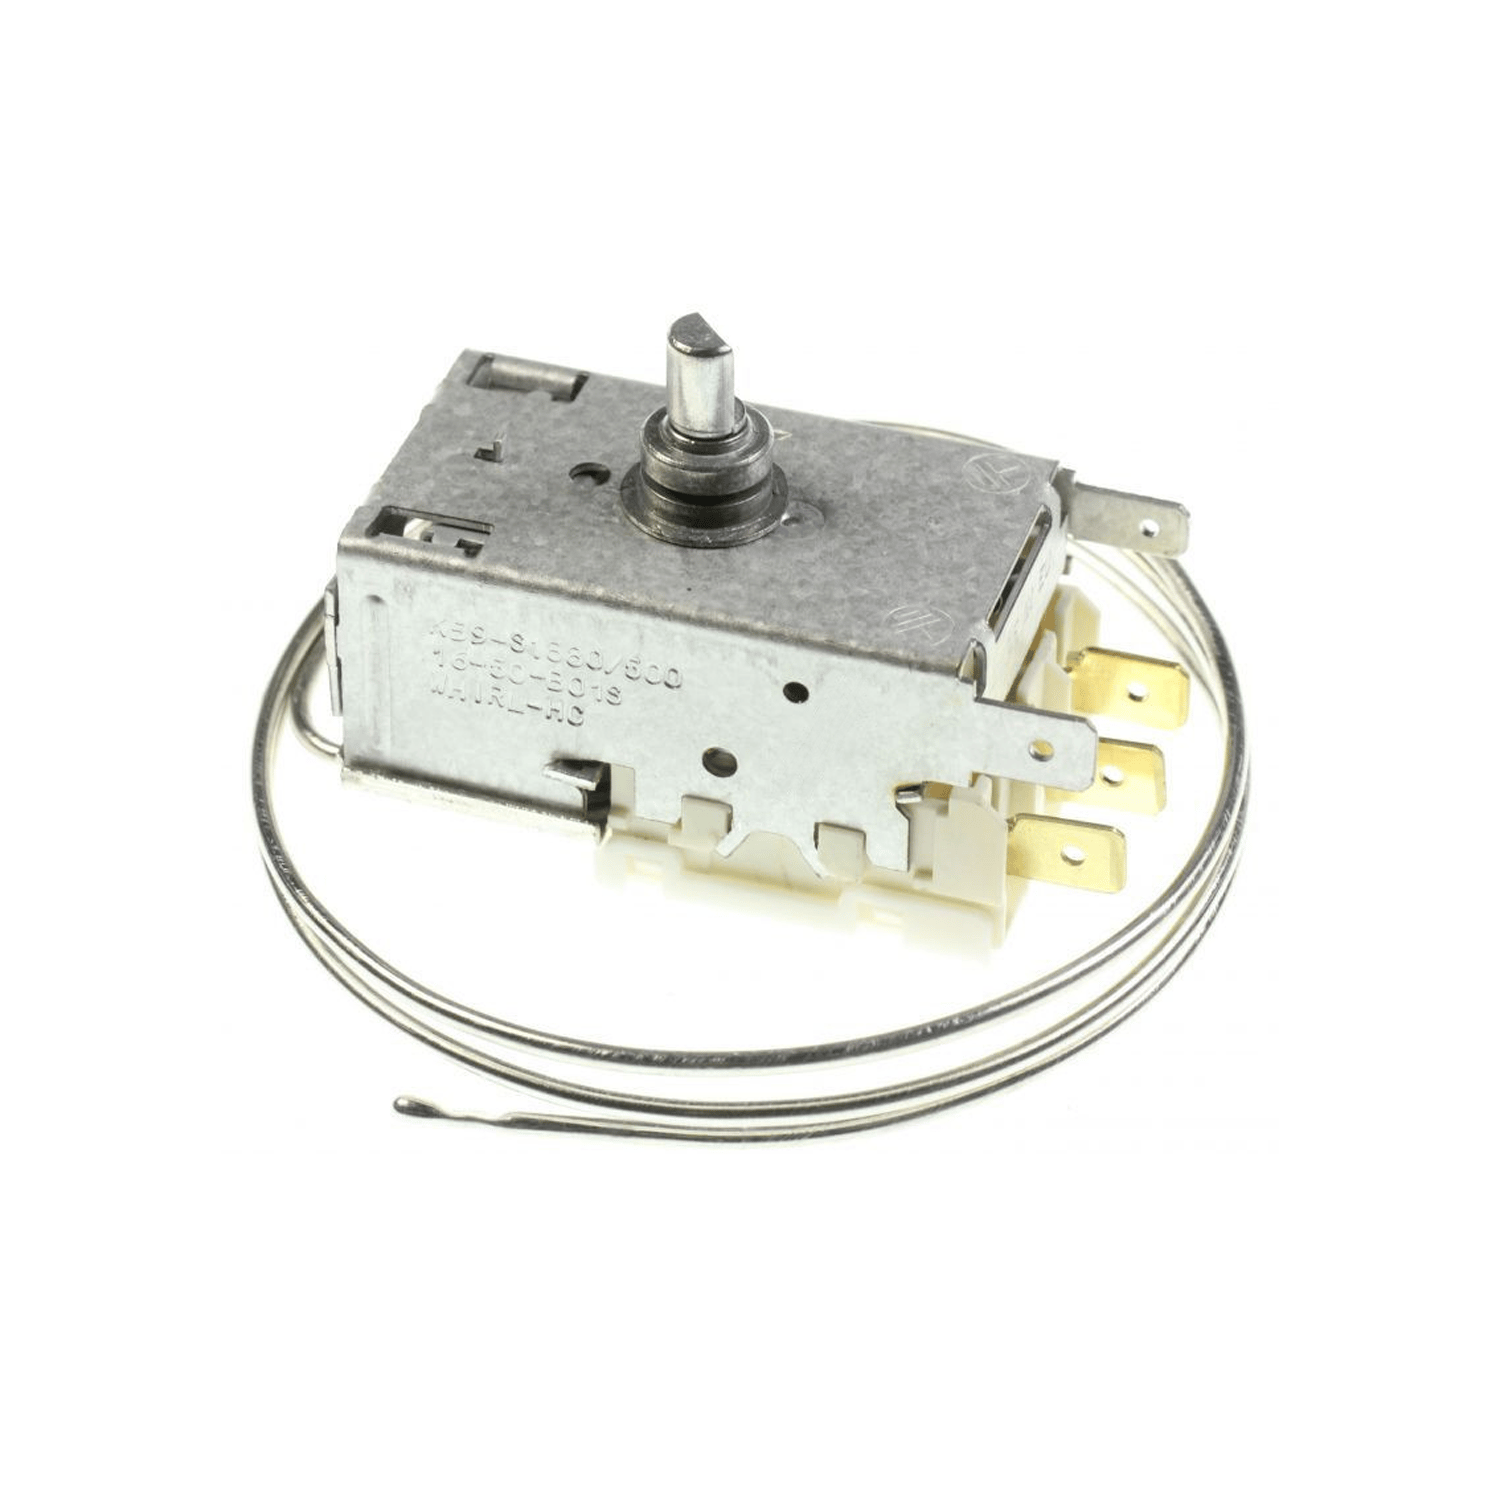 Thermostat Ranco K59-S1880 / 500 for refrigerator ROBERTSHAW, WHIRLPOOL L 700 mm, 6,3mm AMP